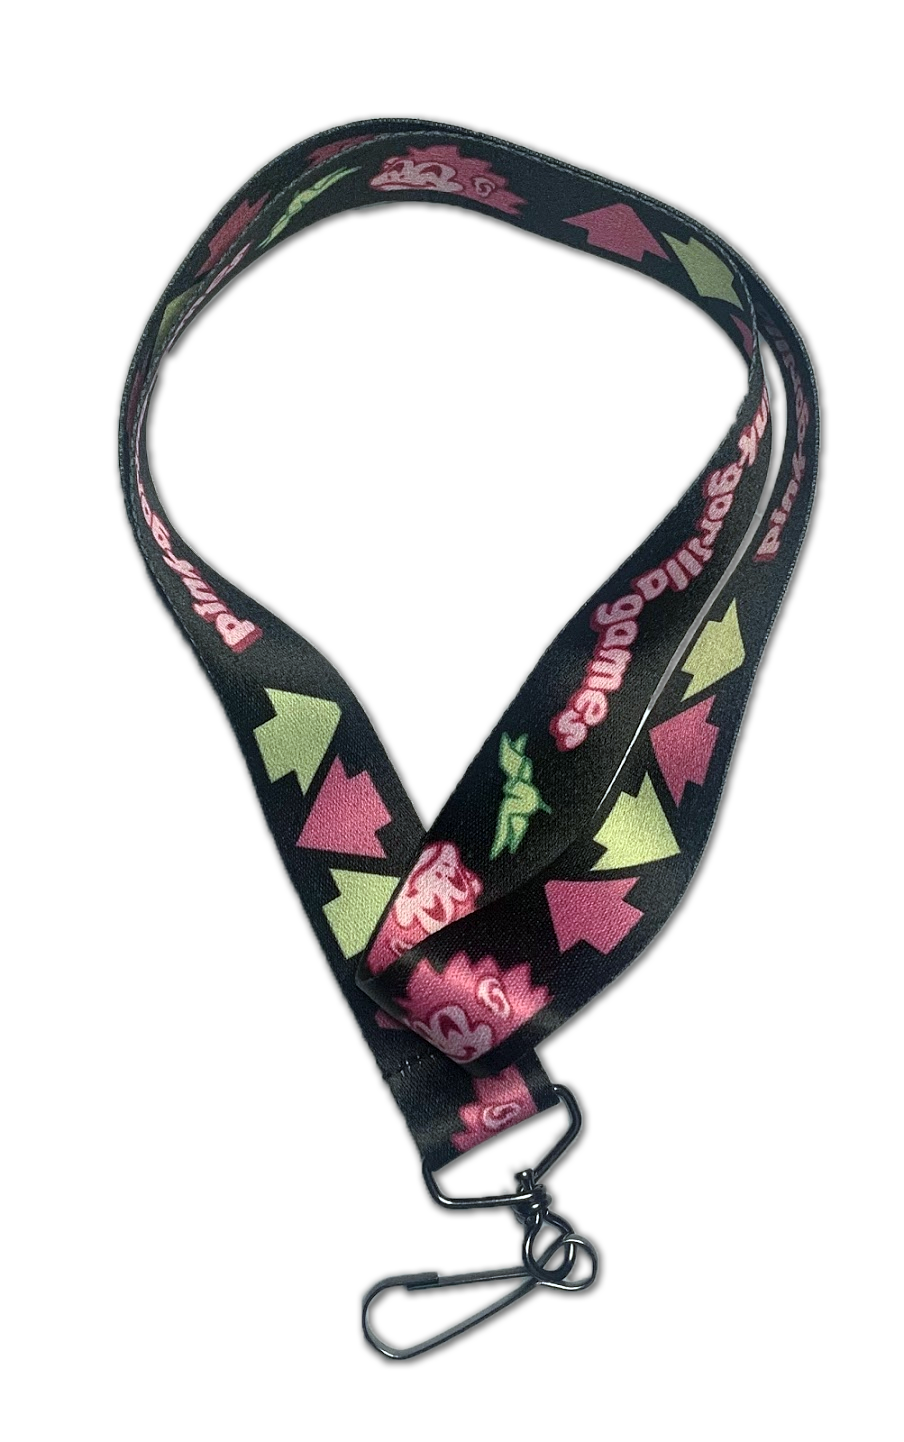 An image of our lanyard, curled into a teardrop shape to see the entire lanyard. The lanyard features the face of our Pink Gorilla mascot, the words Pink Gorilla Games, and pink and green arrows on a black lanyard.